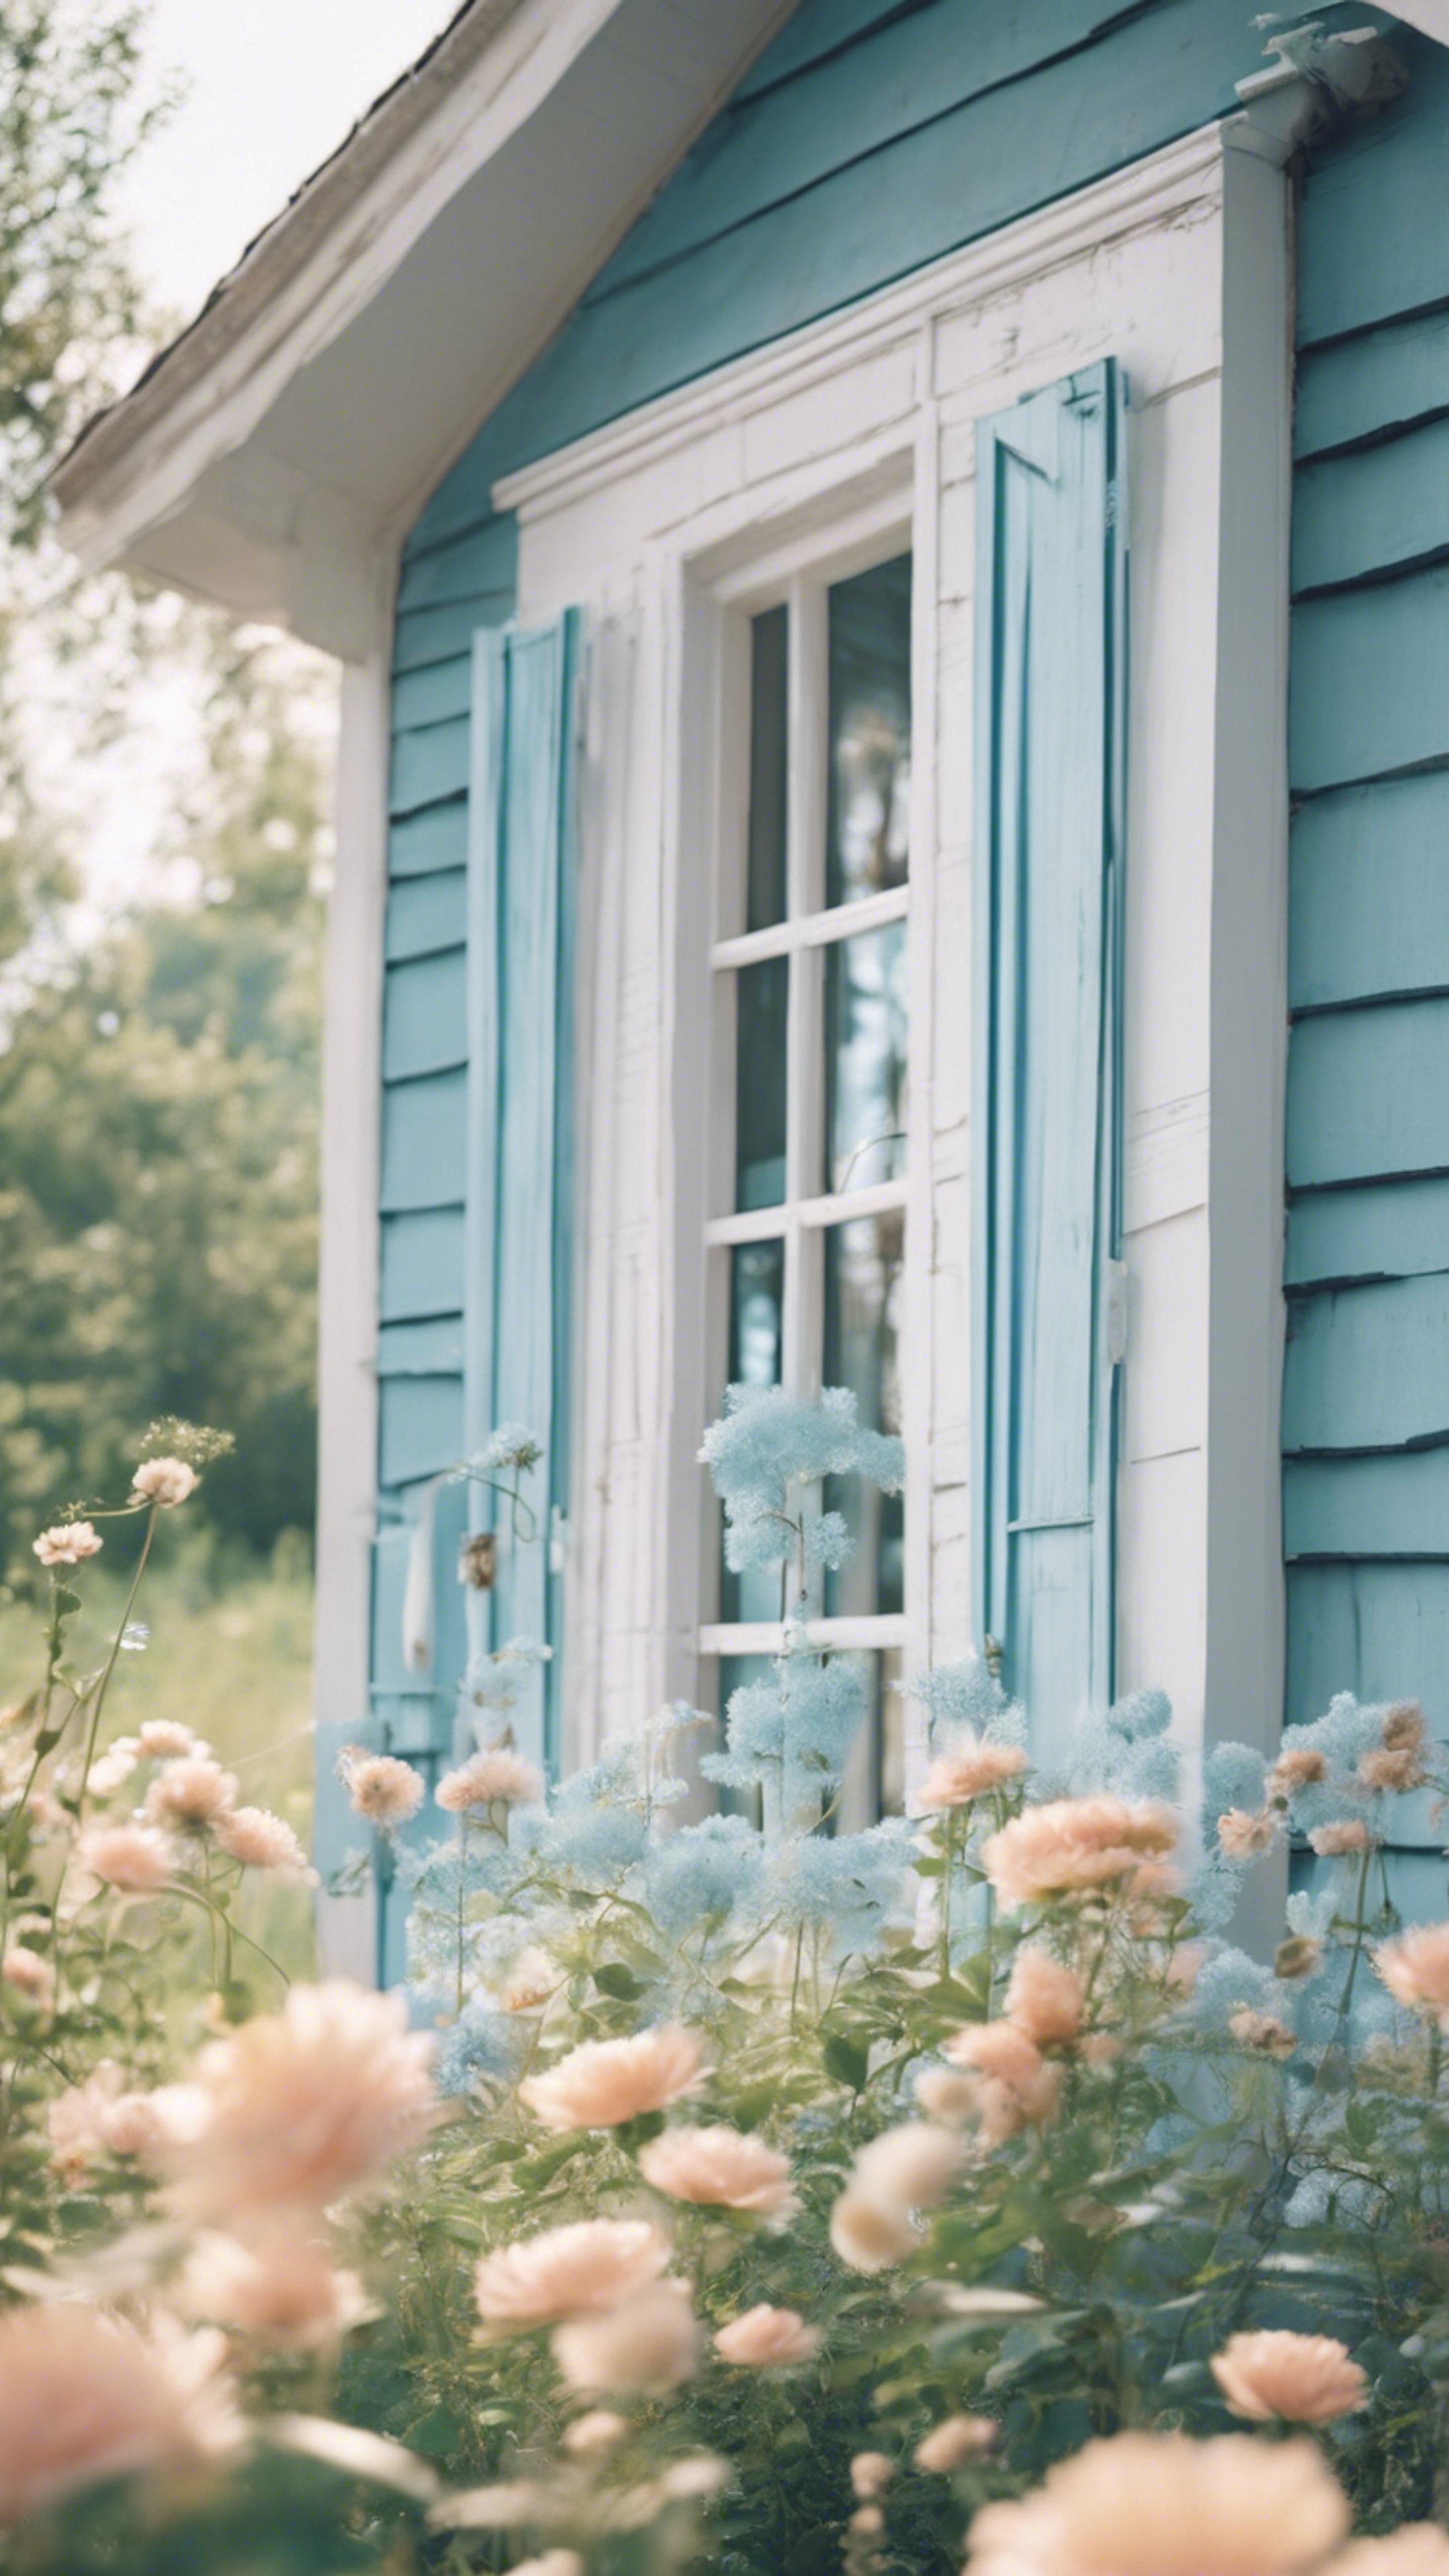 Preppy pastel blue summer farmhouse with white wooden windows. Валлпапер[48dc49ad1a9b4a7c9166]